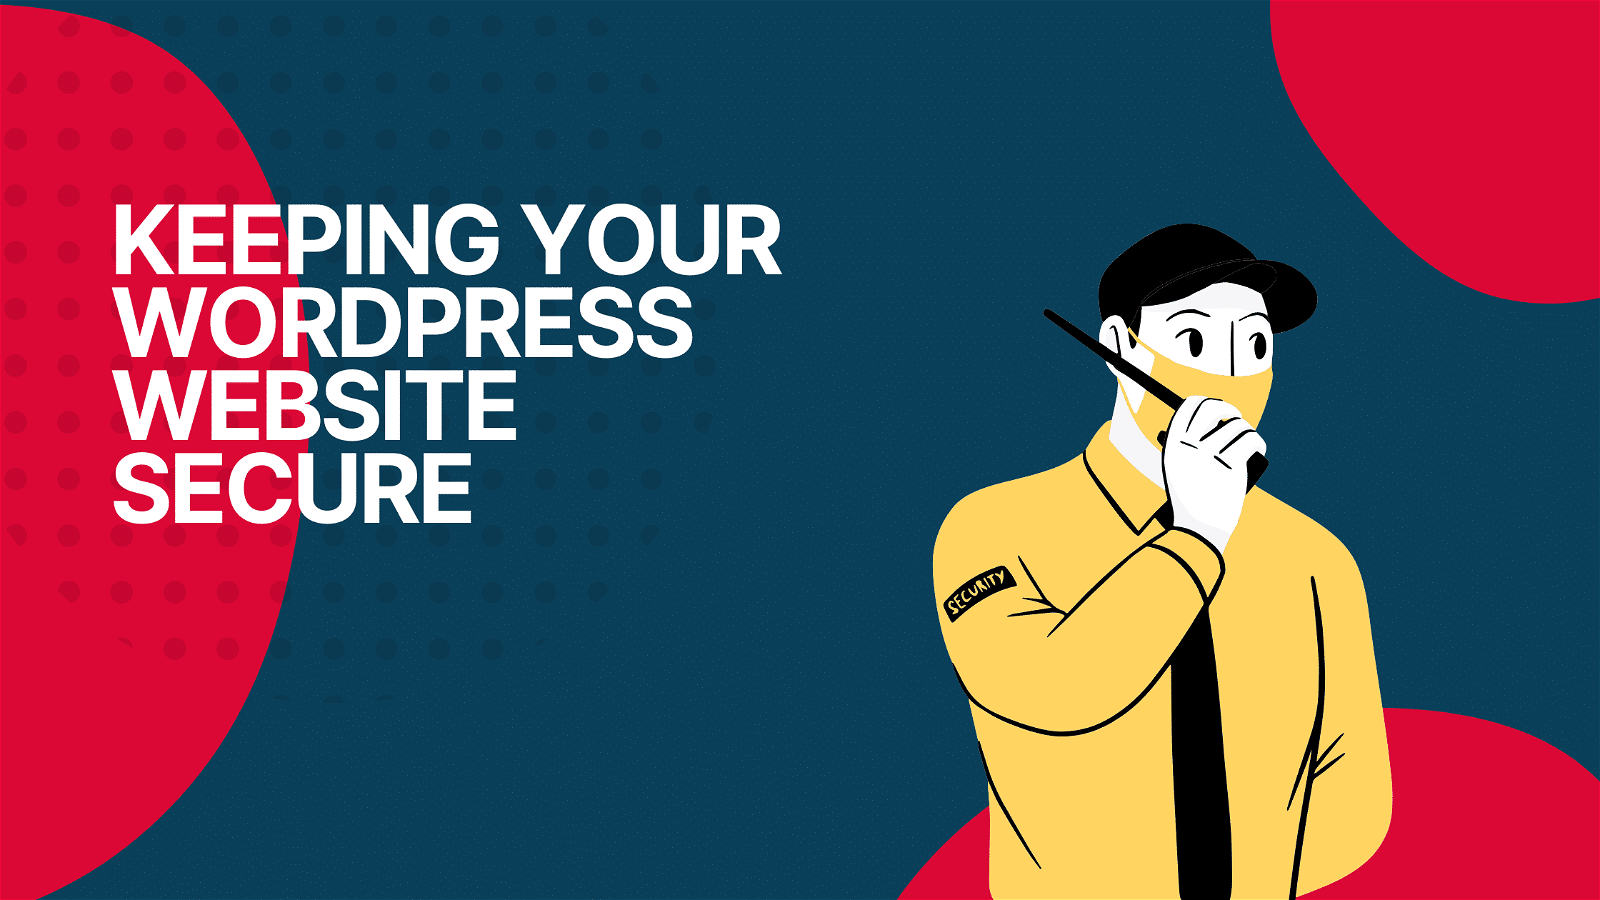 The image is showing steps to keep a WordPress website secure by taking security measures.